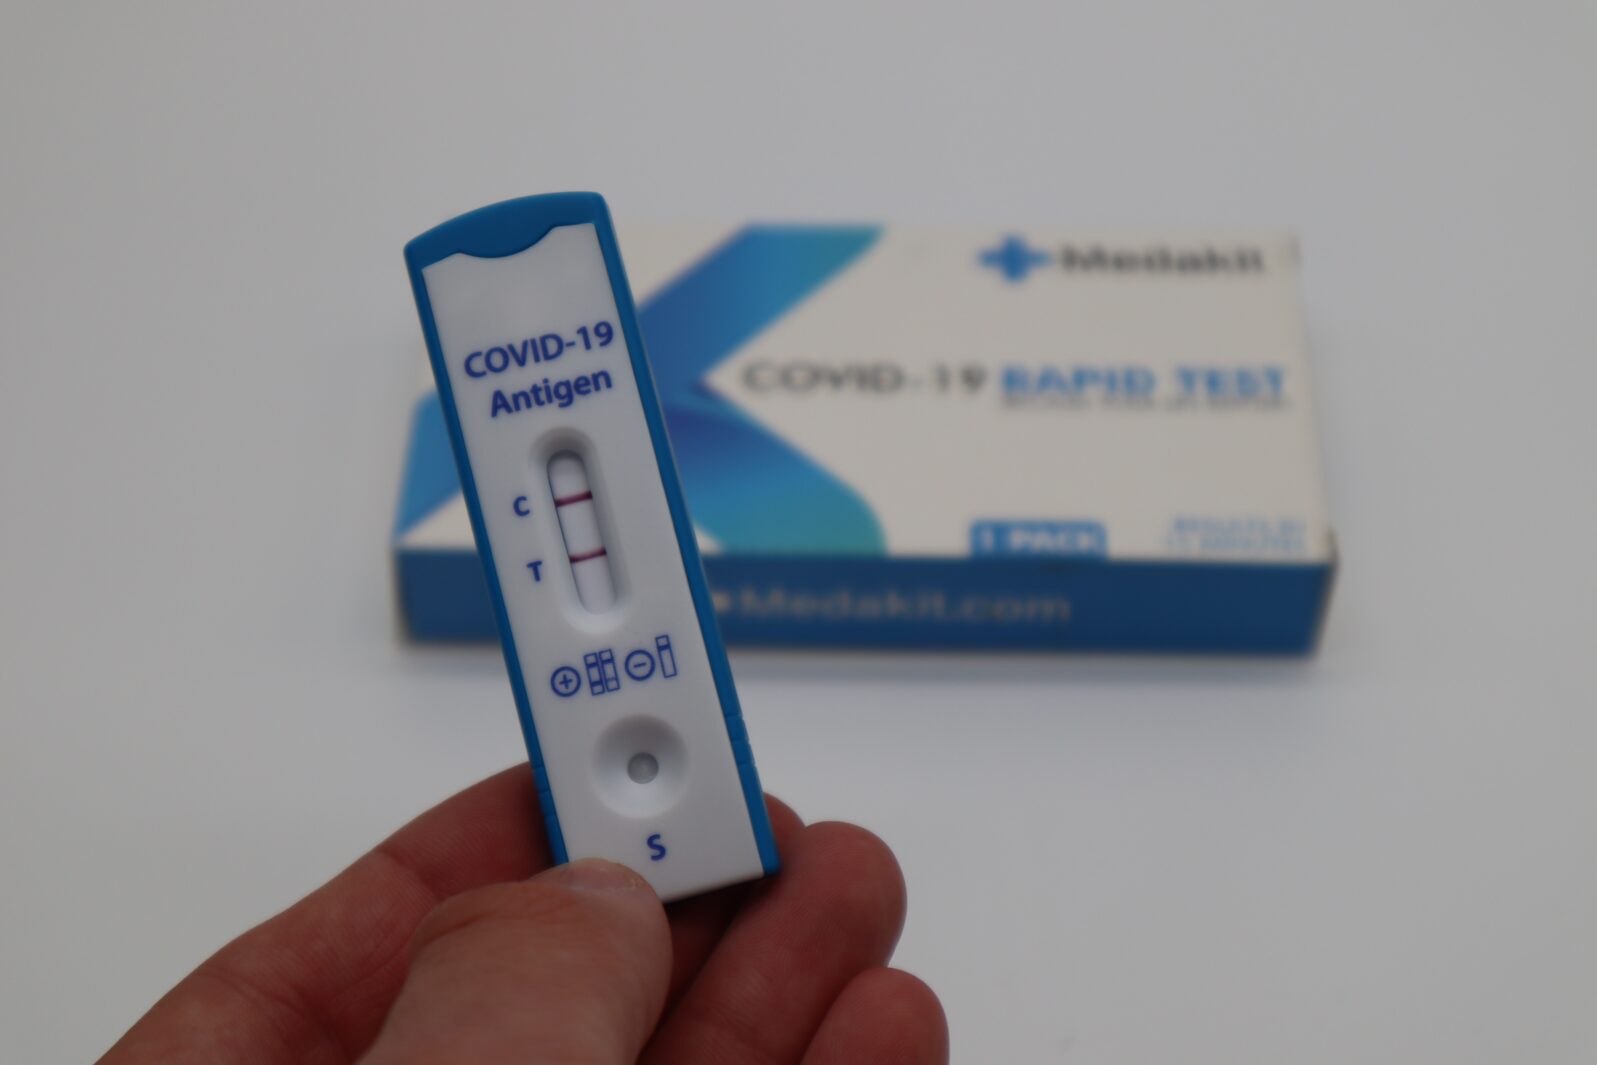 An image of a positive COVID rapid antigen test, which can result long COVID.